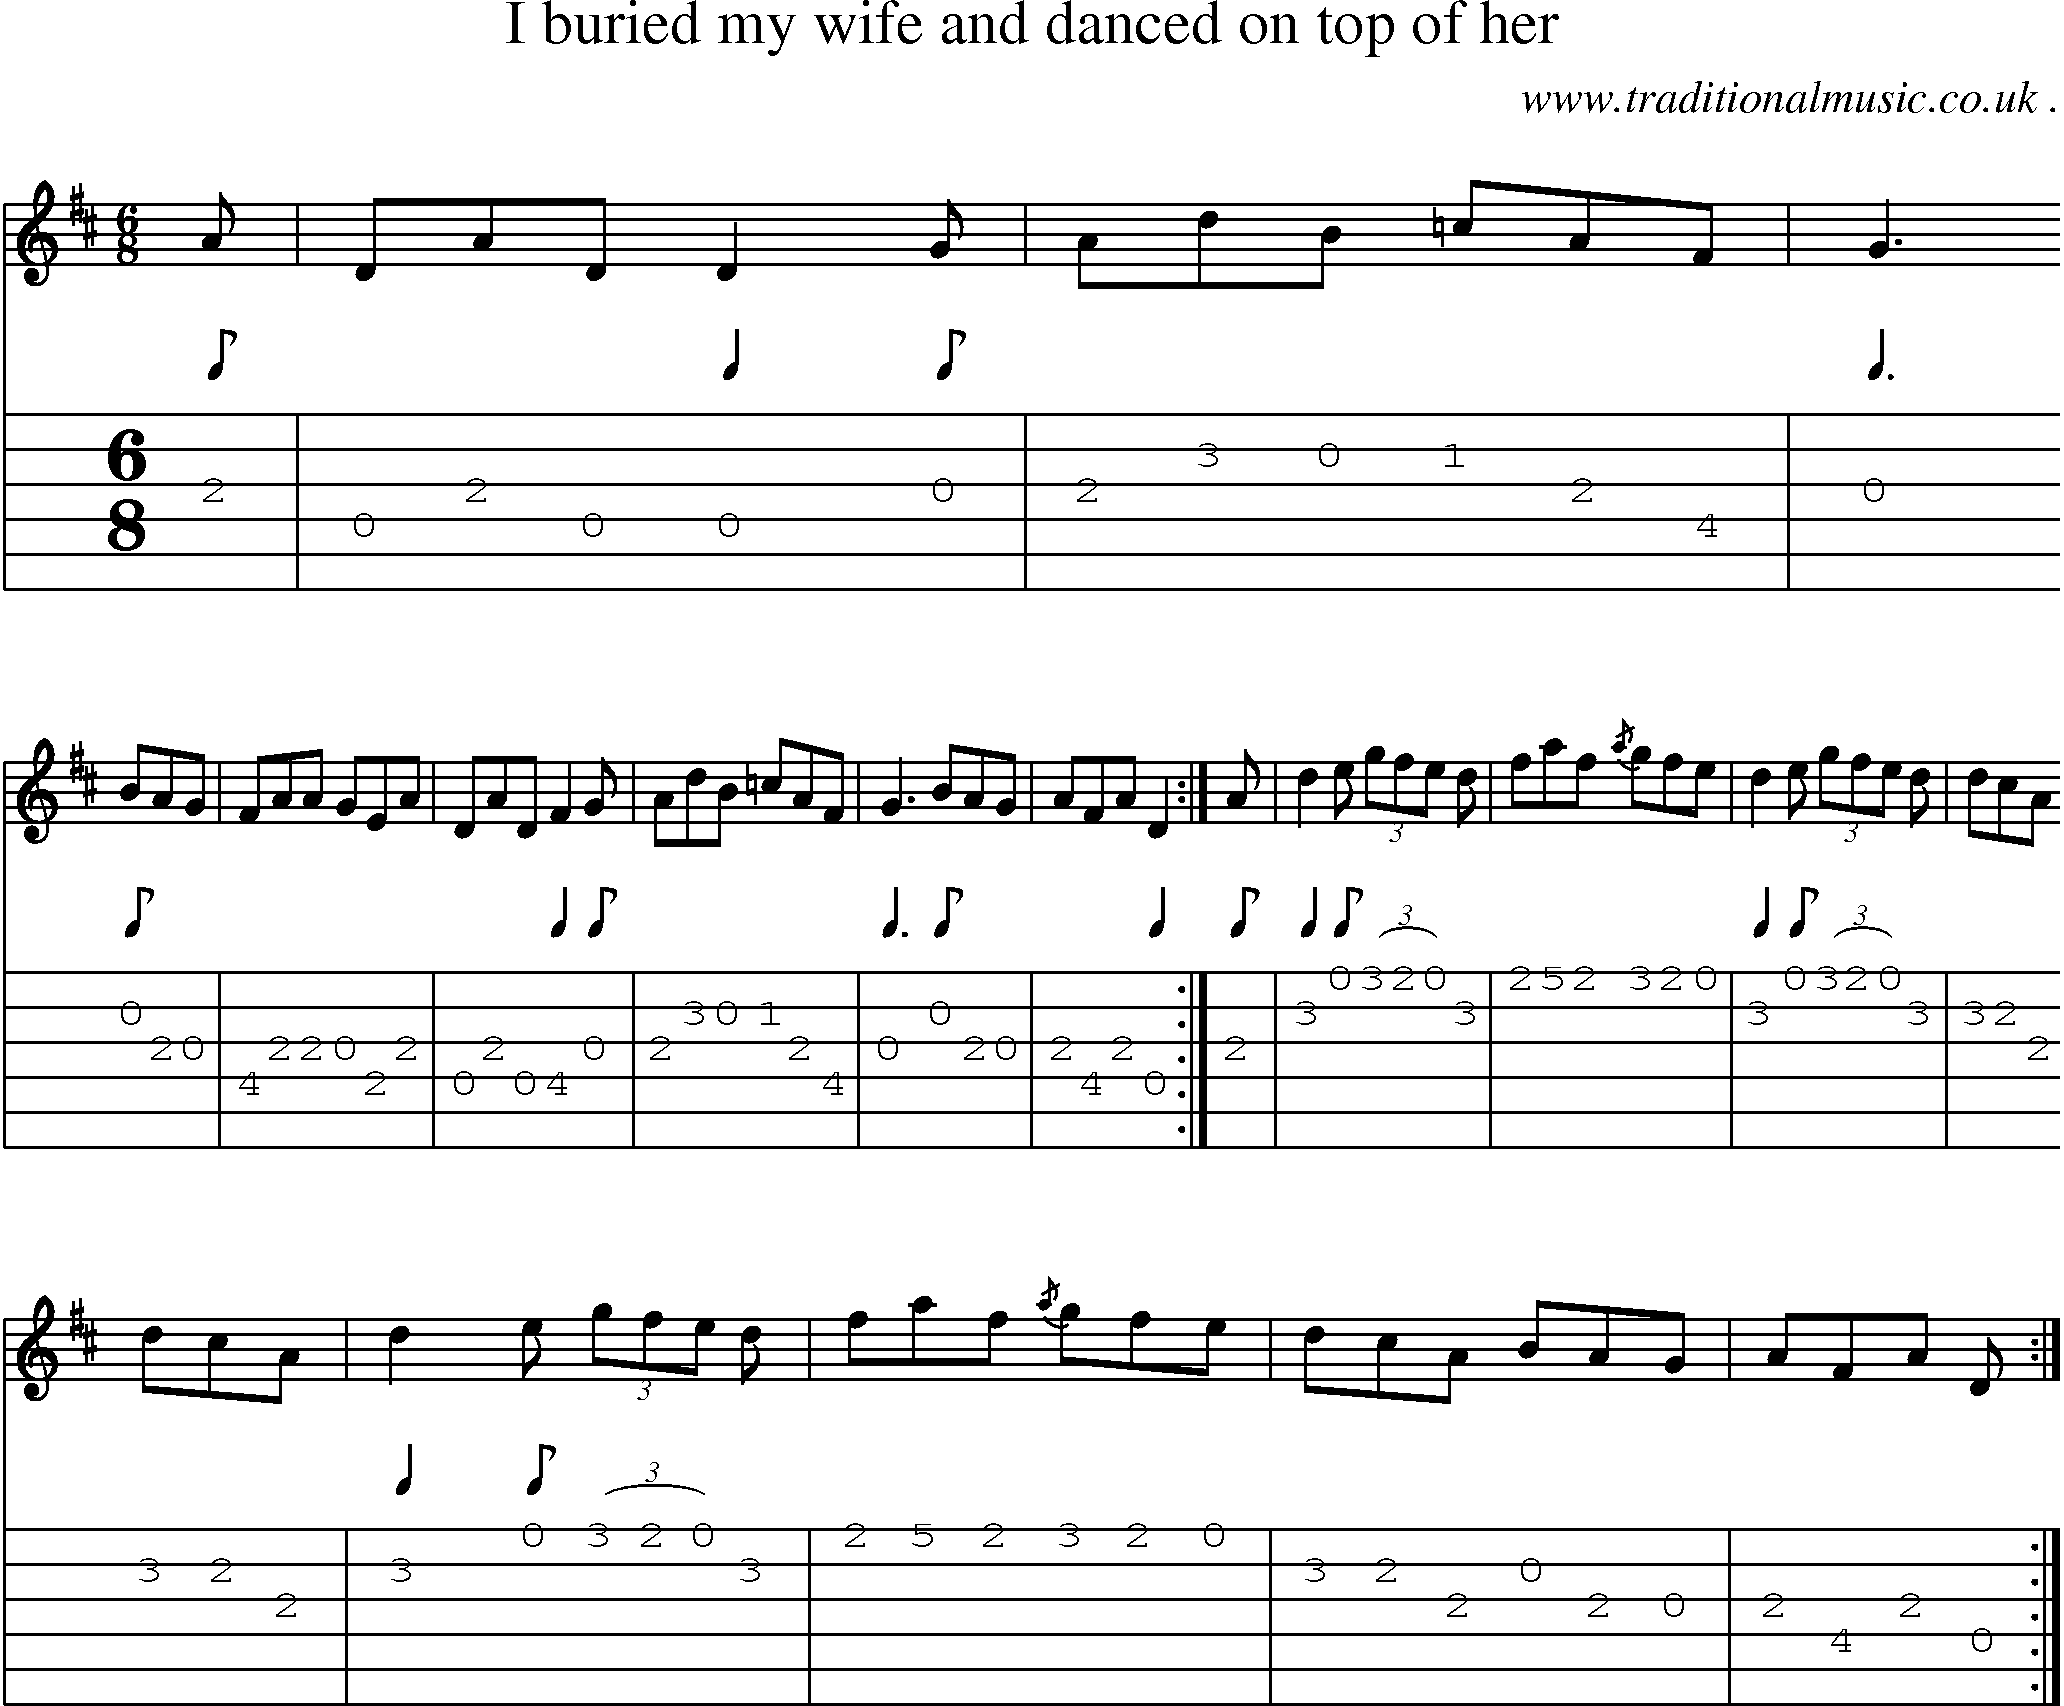 Sheet-music  score, Chords and Guitar Tabs for I Buried My Wife And Danced On Top Of Her